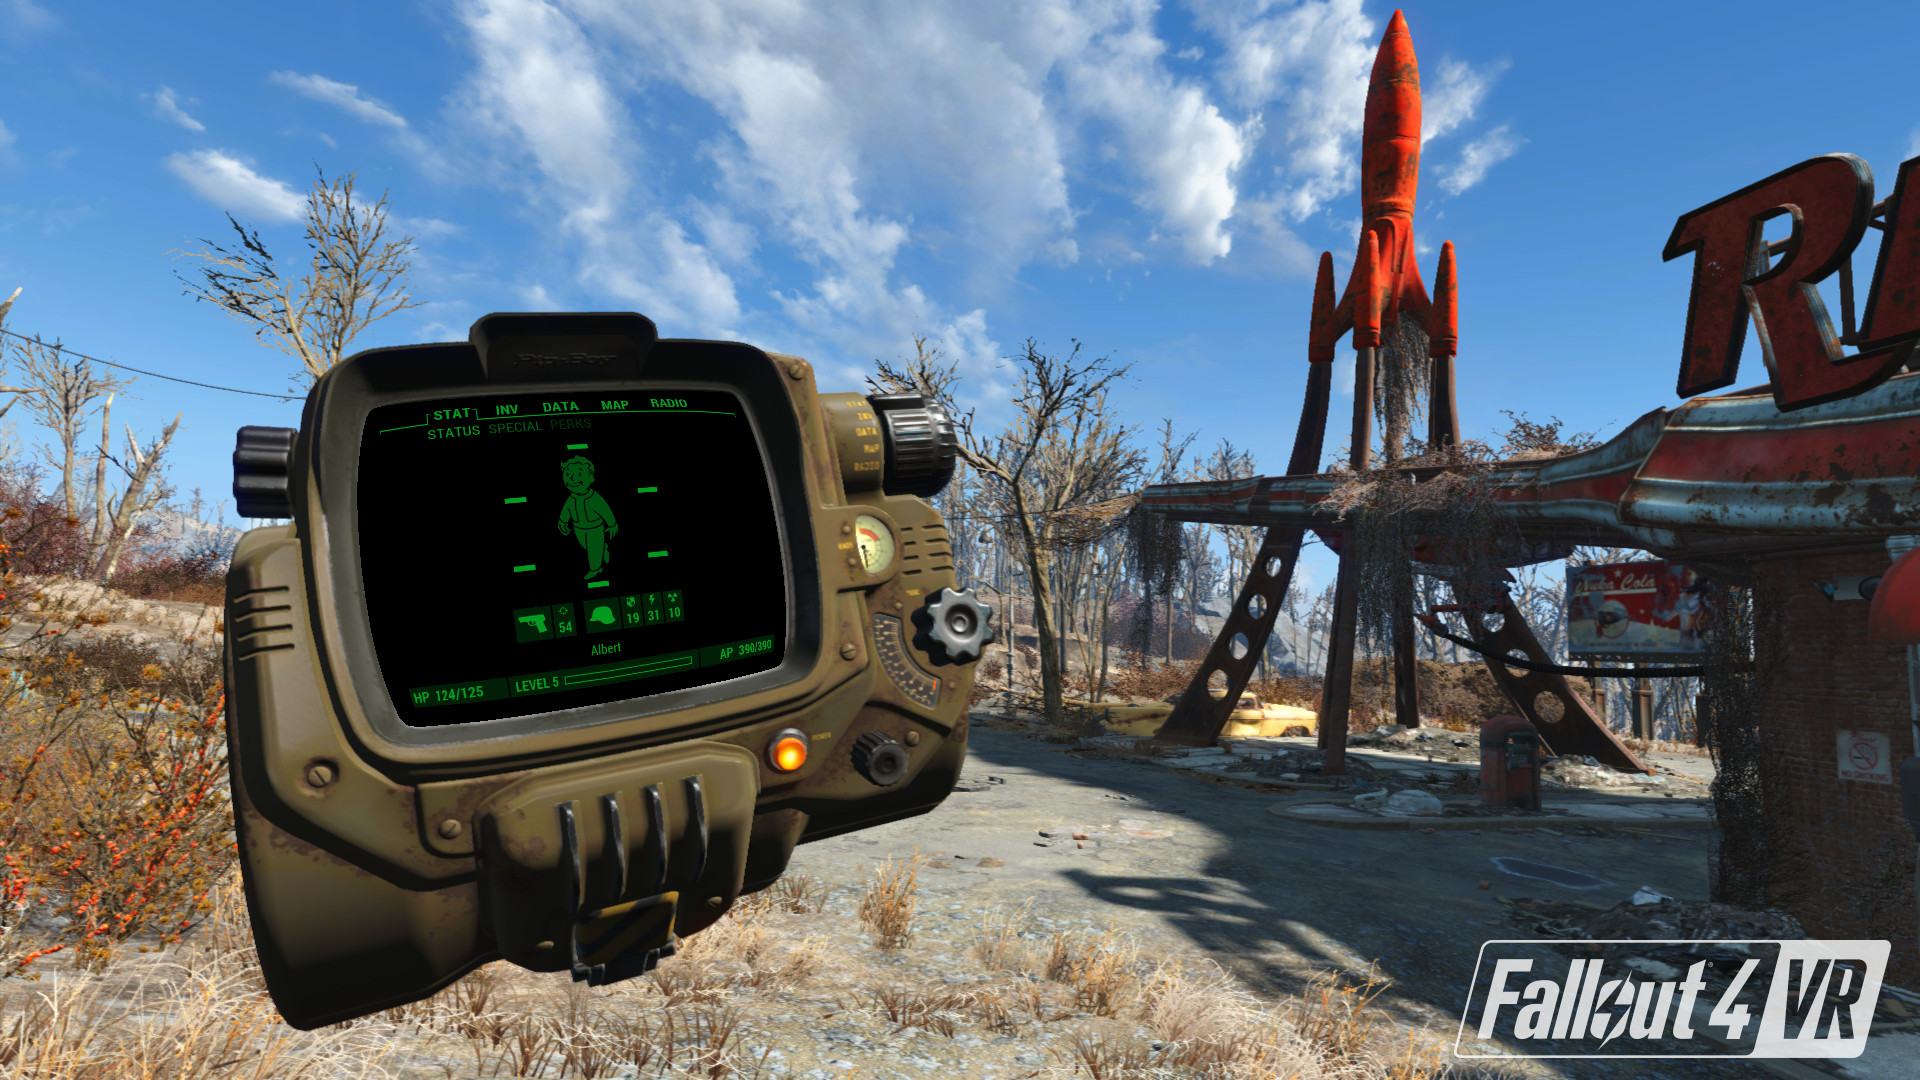 Save 75% on Fallout 4 VR on Steam